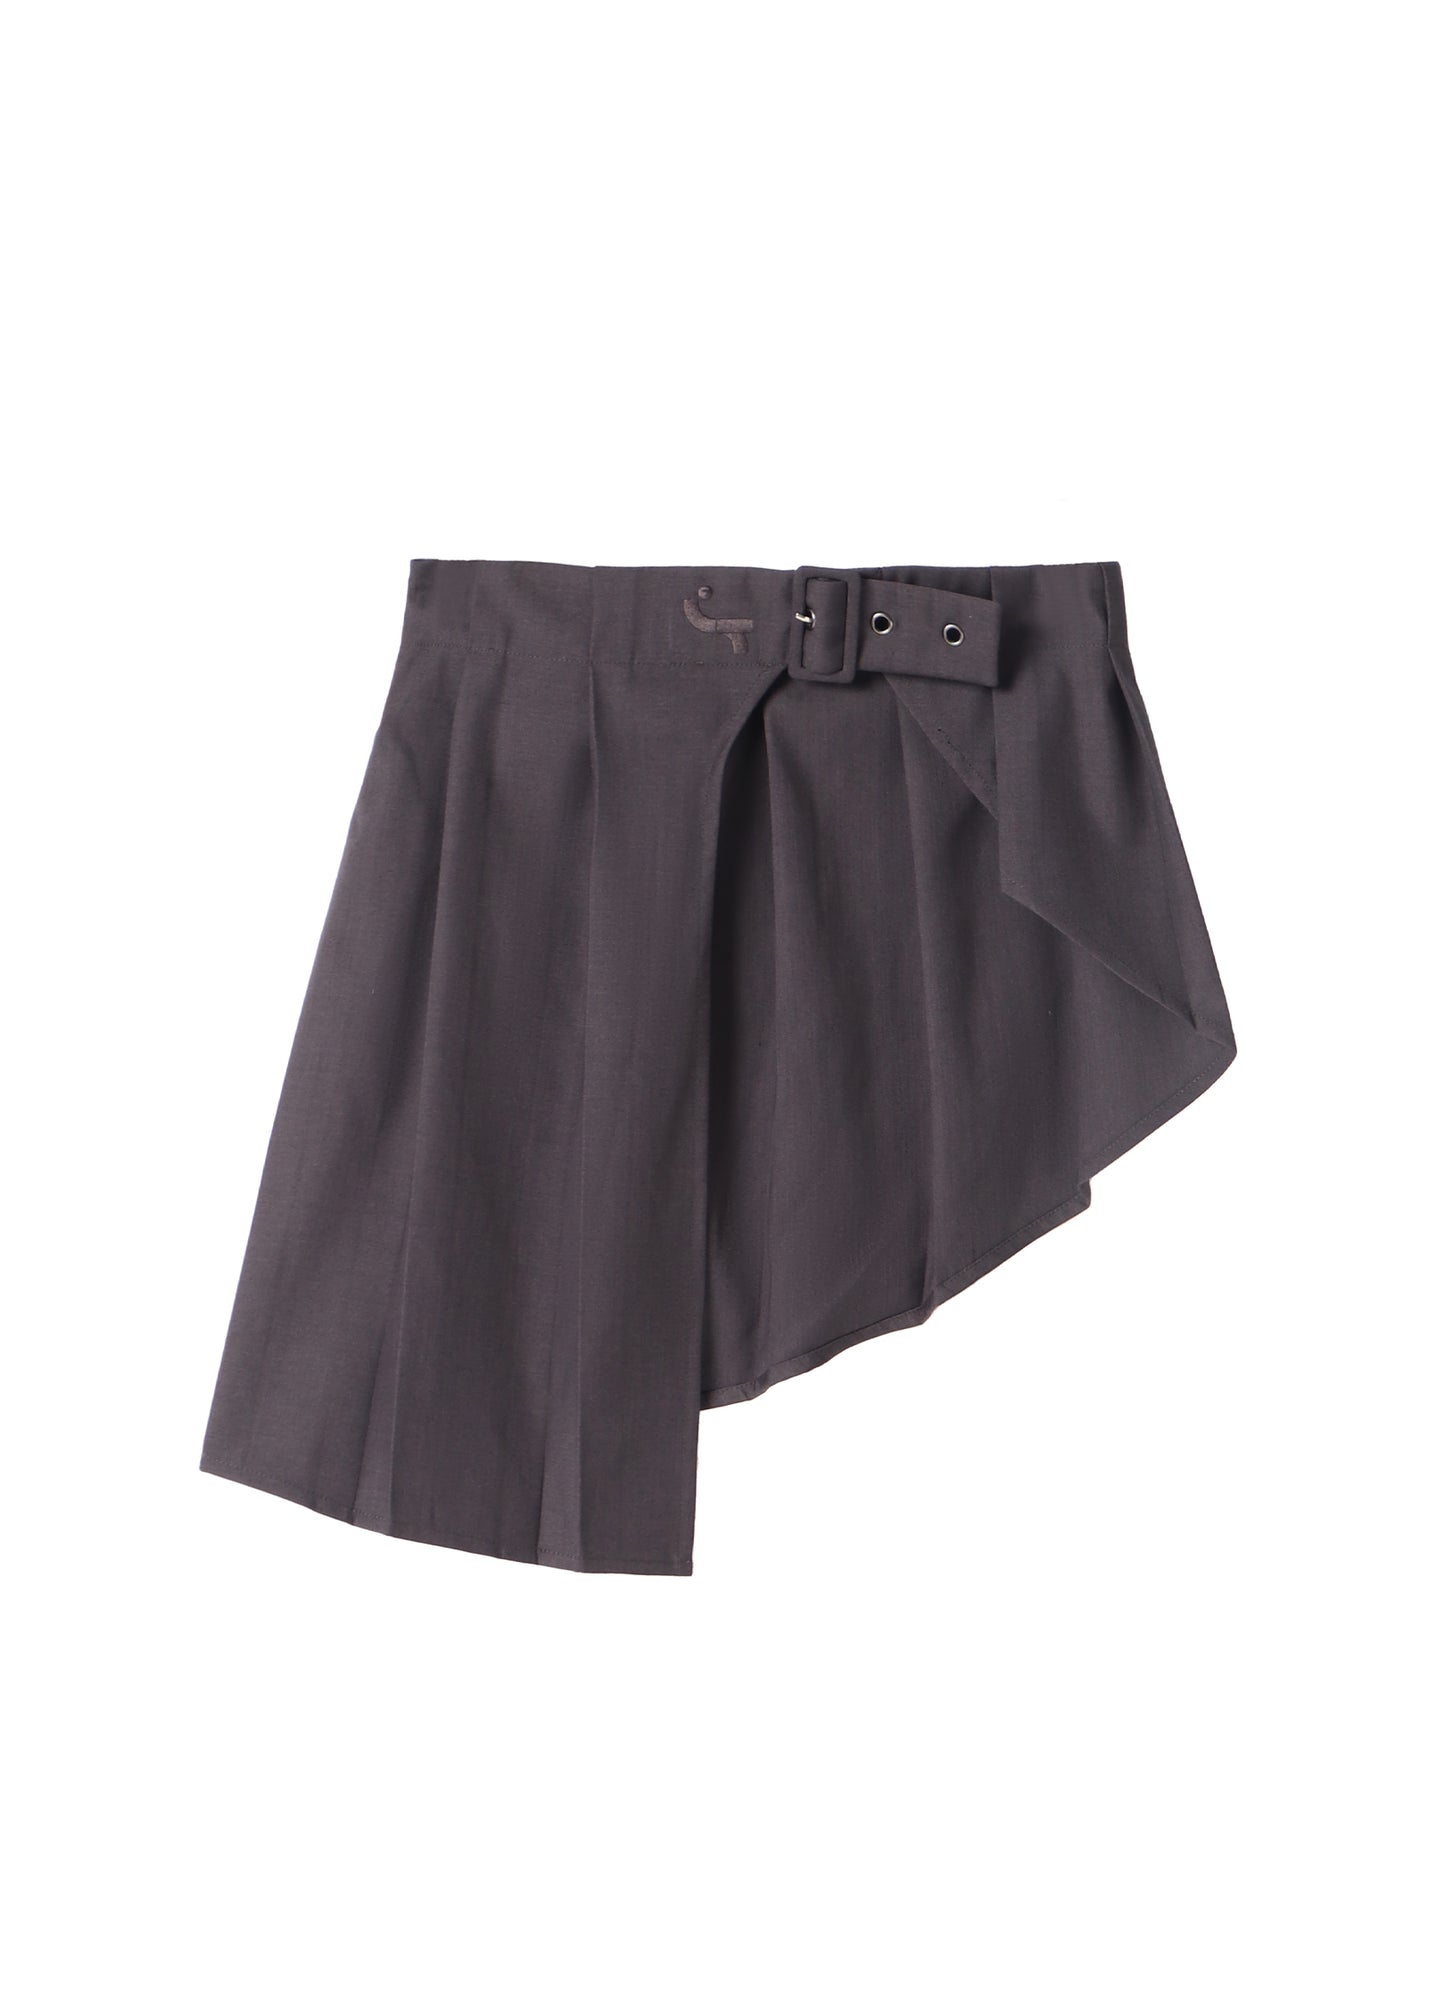 Outer Layer Half Skirt